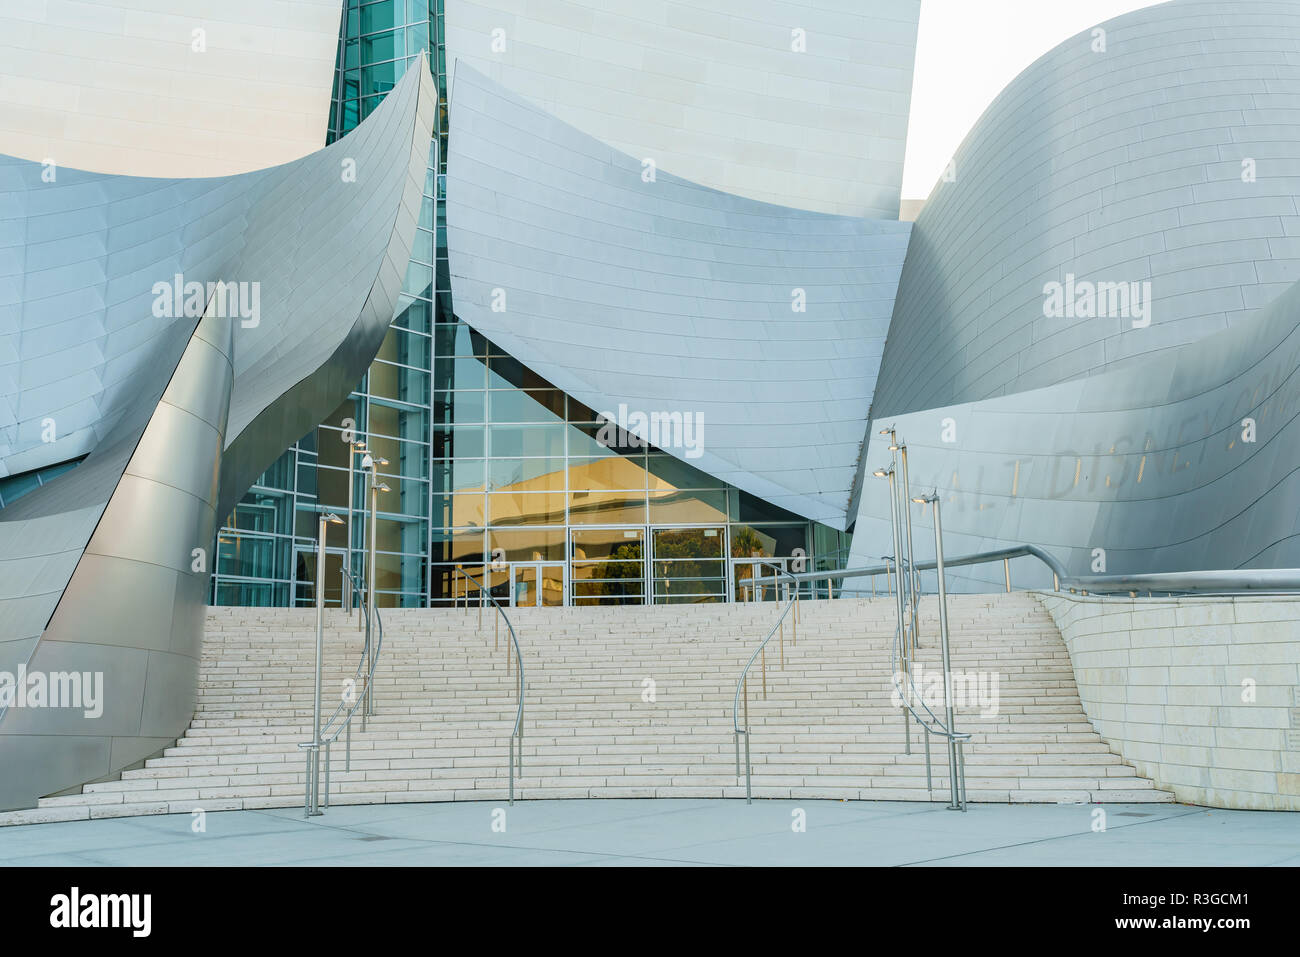 Los Angeles, AUG 2: Afternoon view of Walt Disney Concert Hall on AUG 2, 2018 at Los Angeles, California Stock Photo